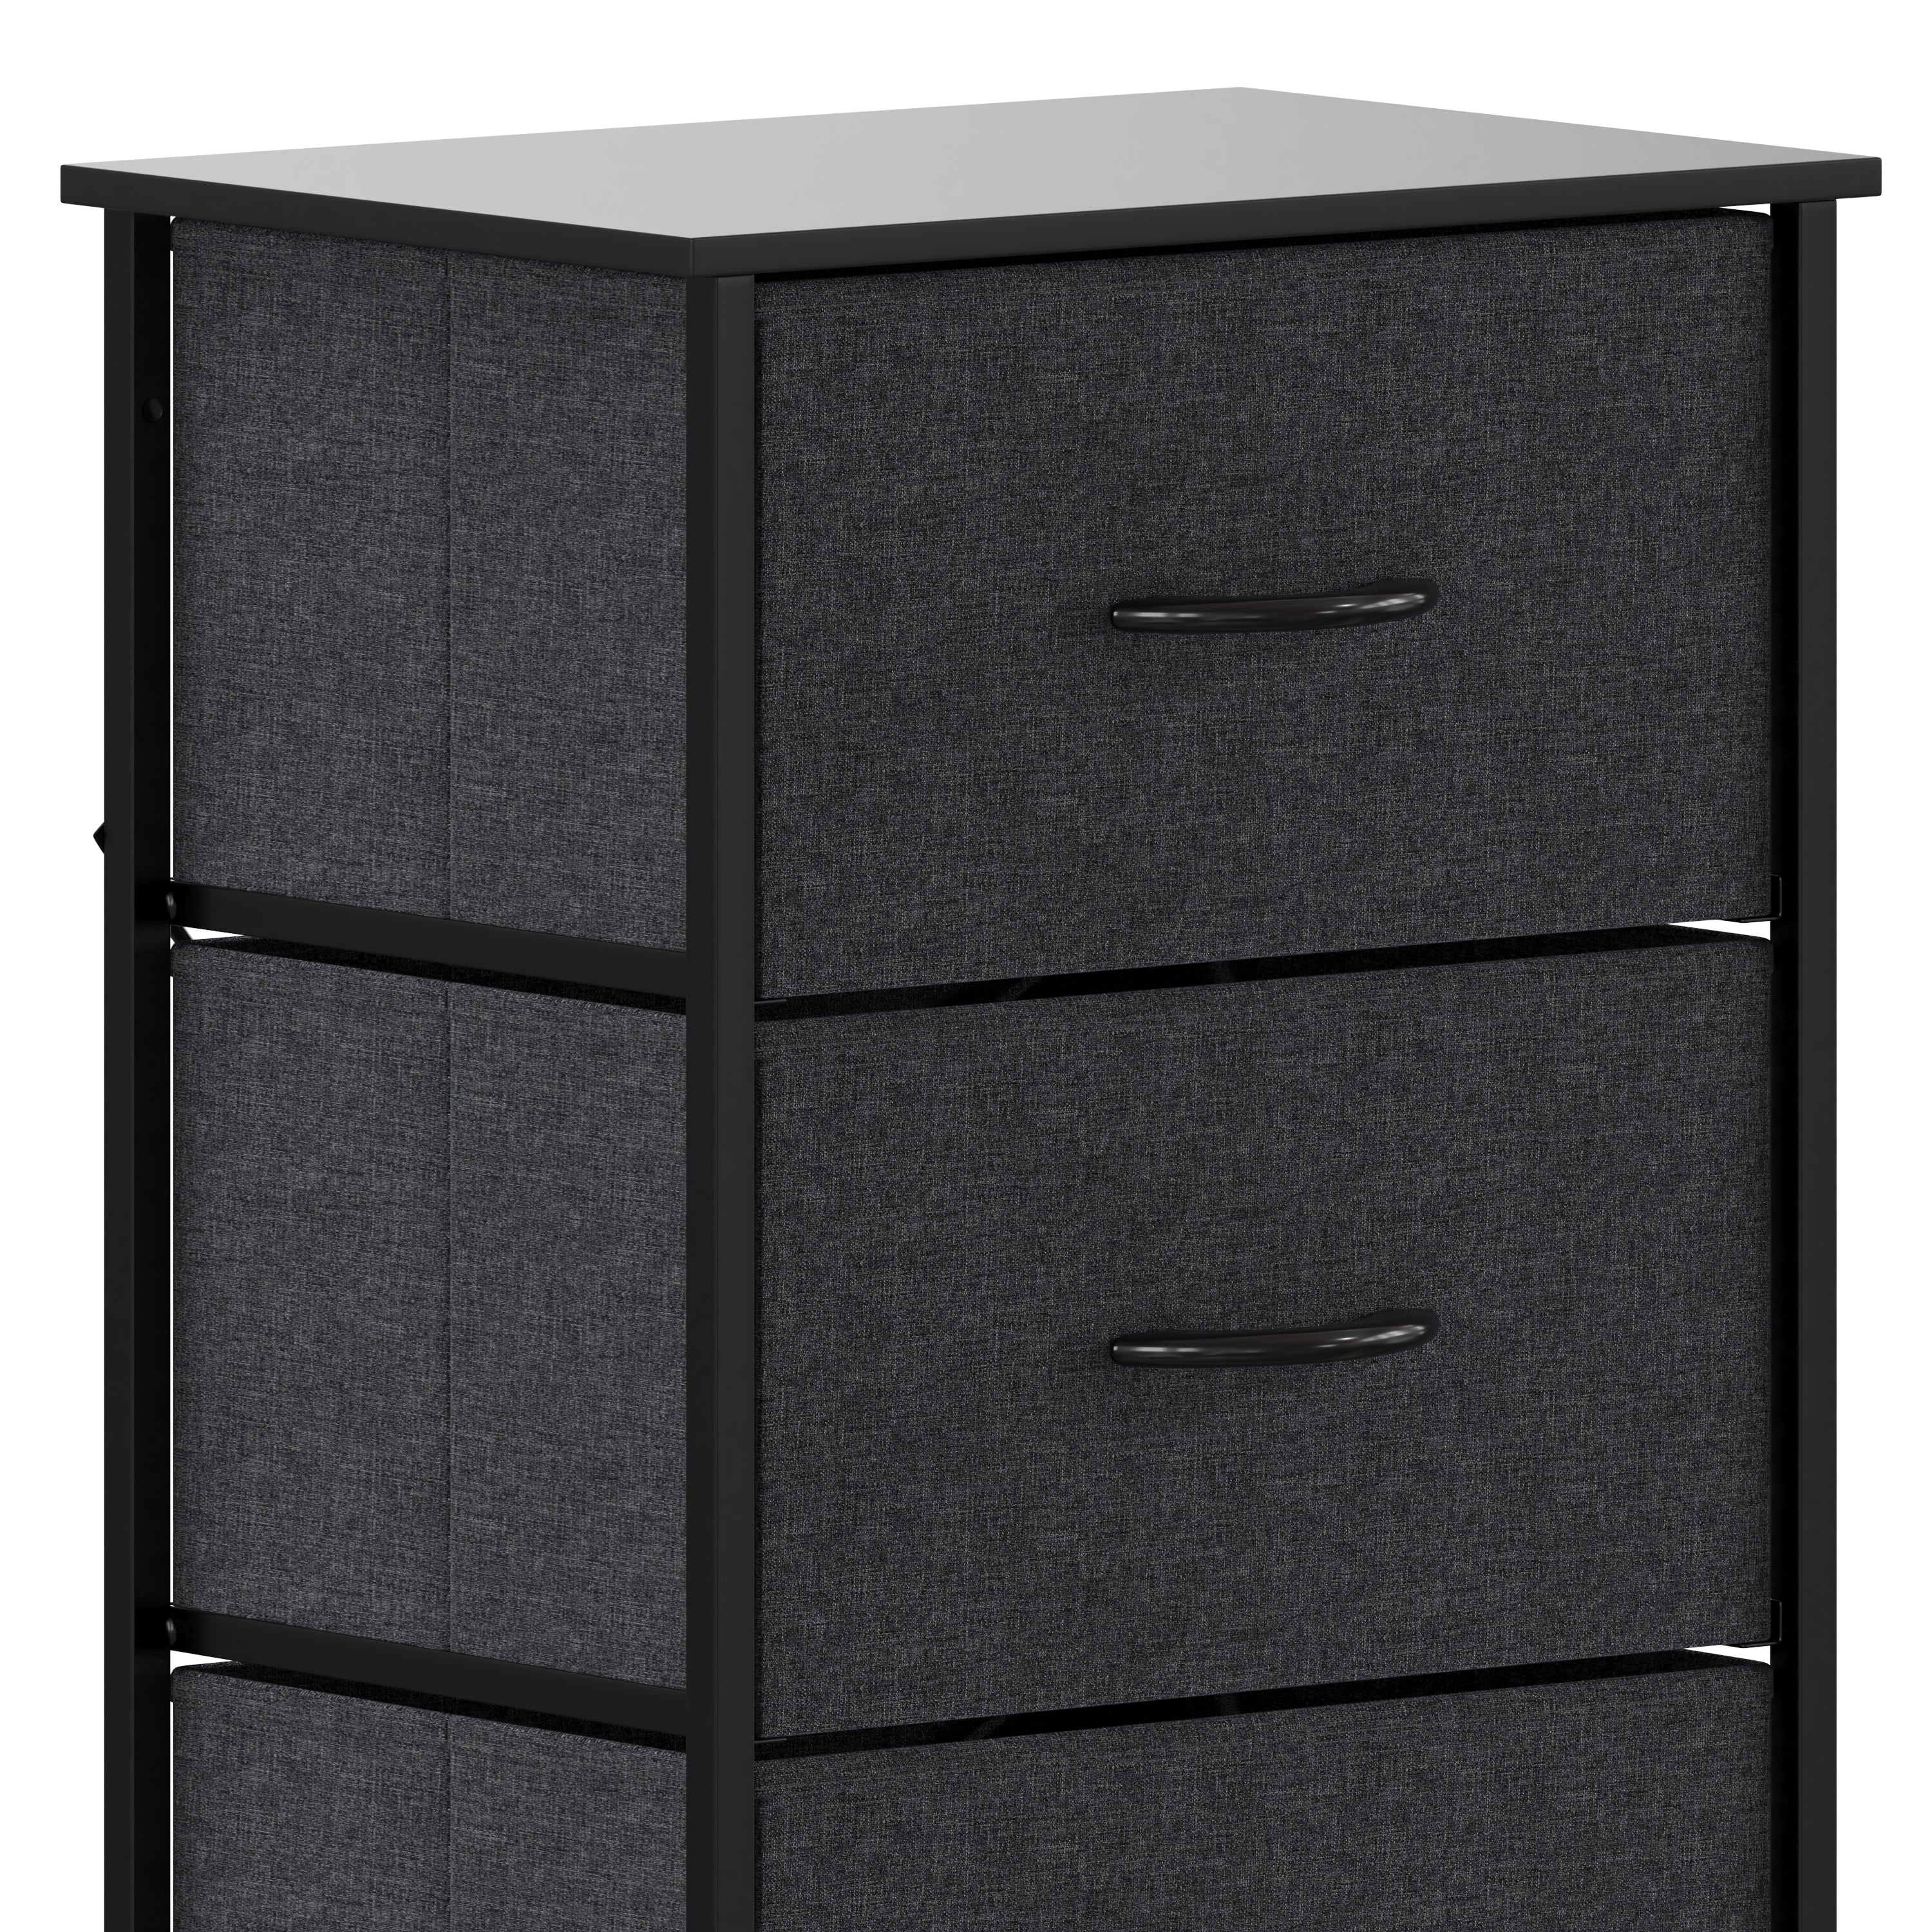 Harris 4 Drawer Vertical Storage Dresser with Cast Iron Frame, Wood Top and Easy Pull Fabric Drawers with Wooden Handles-Dresser-Flash Furniture-Wall2Wall Furnishings